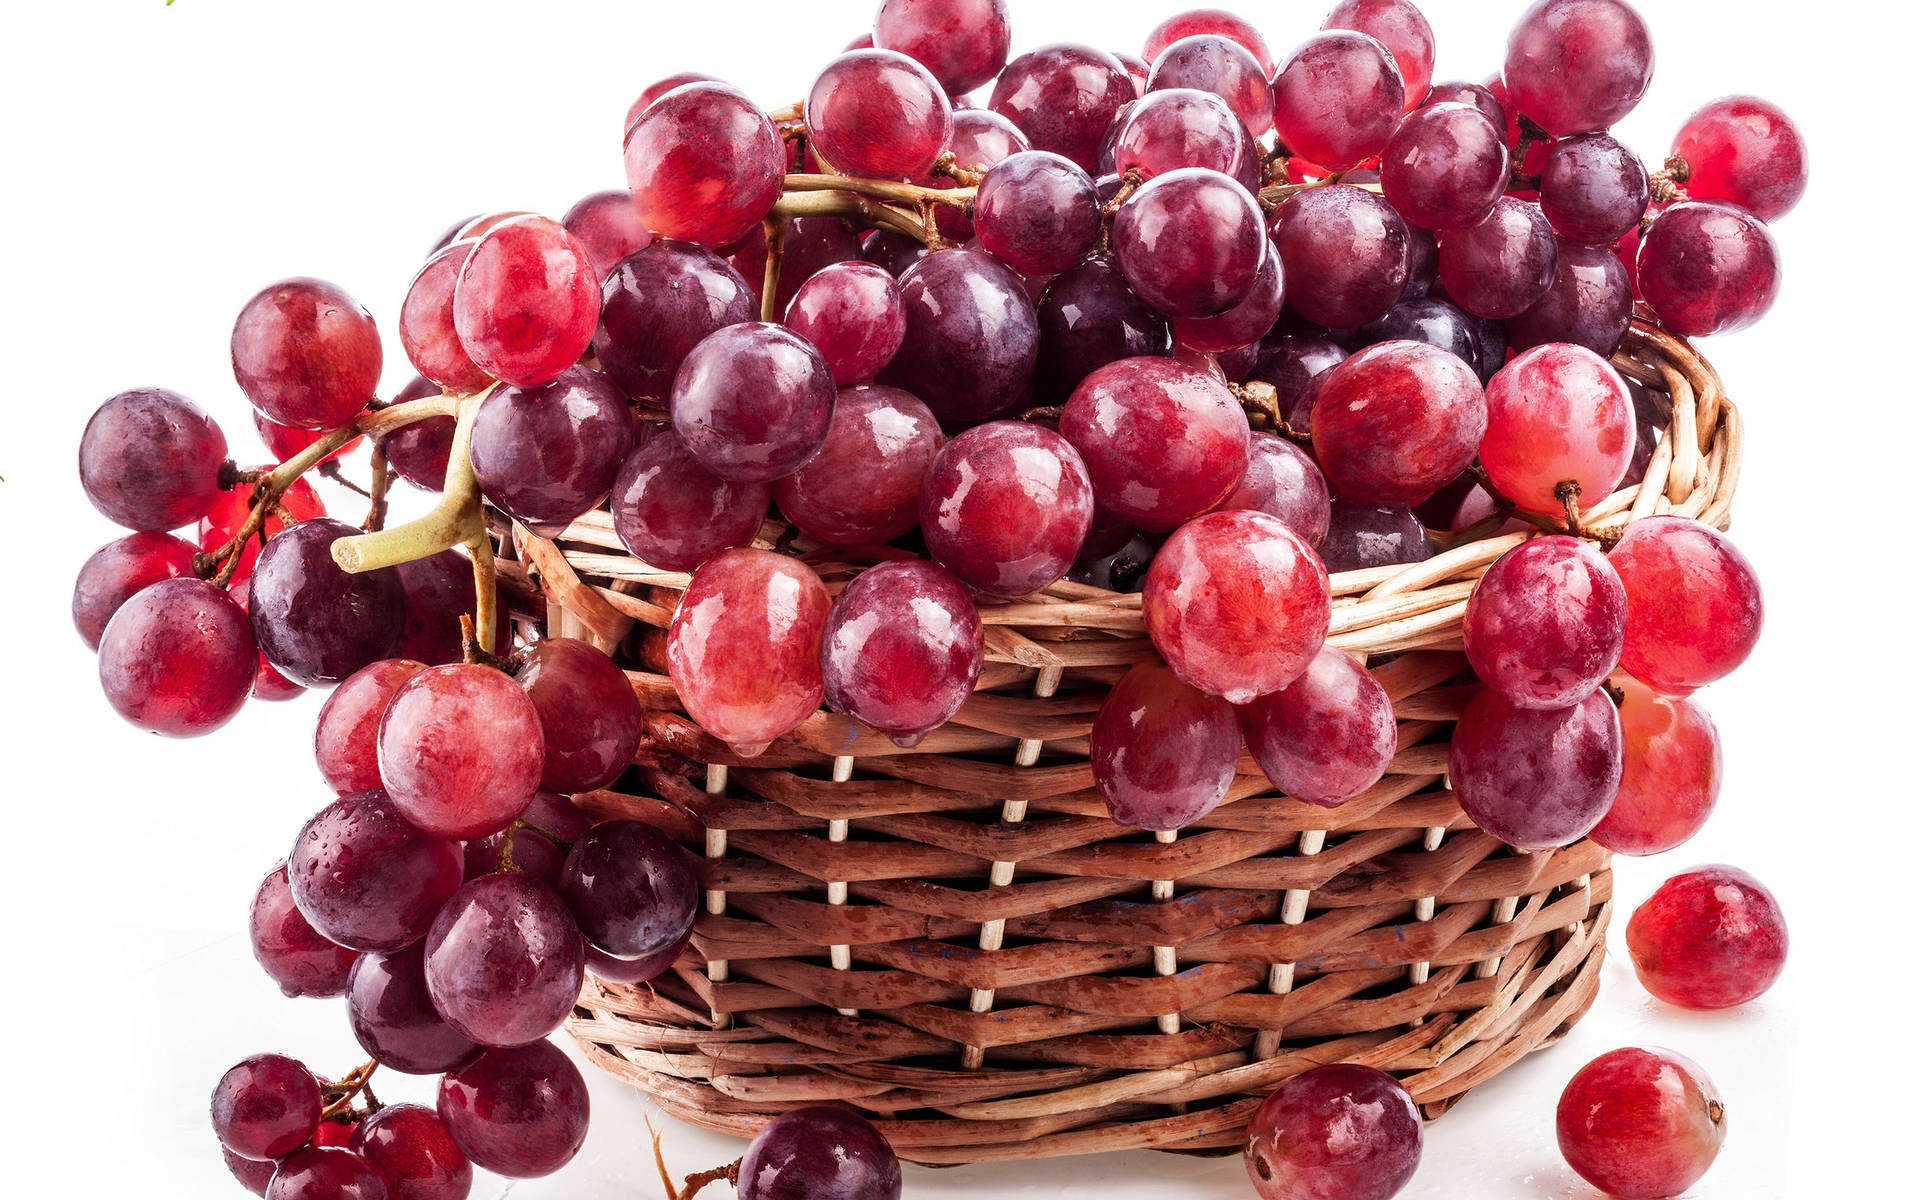 A Basket Full Of Luscious Red Grapes. Background